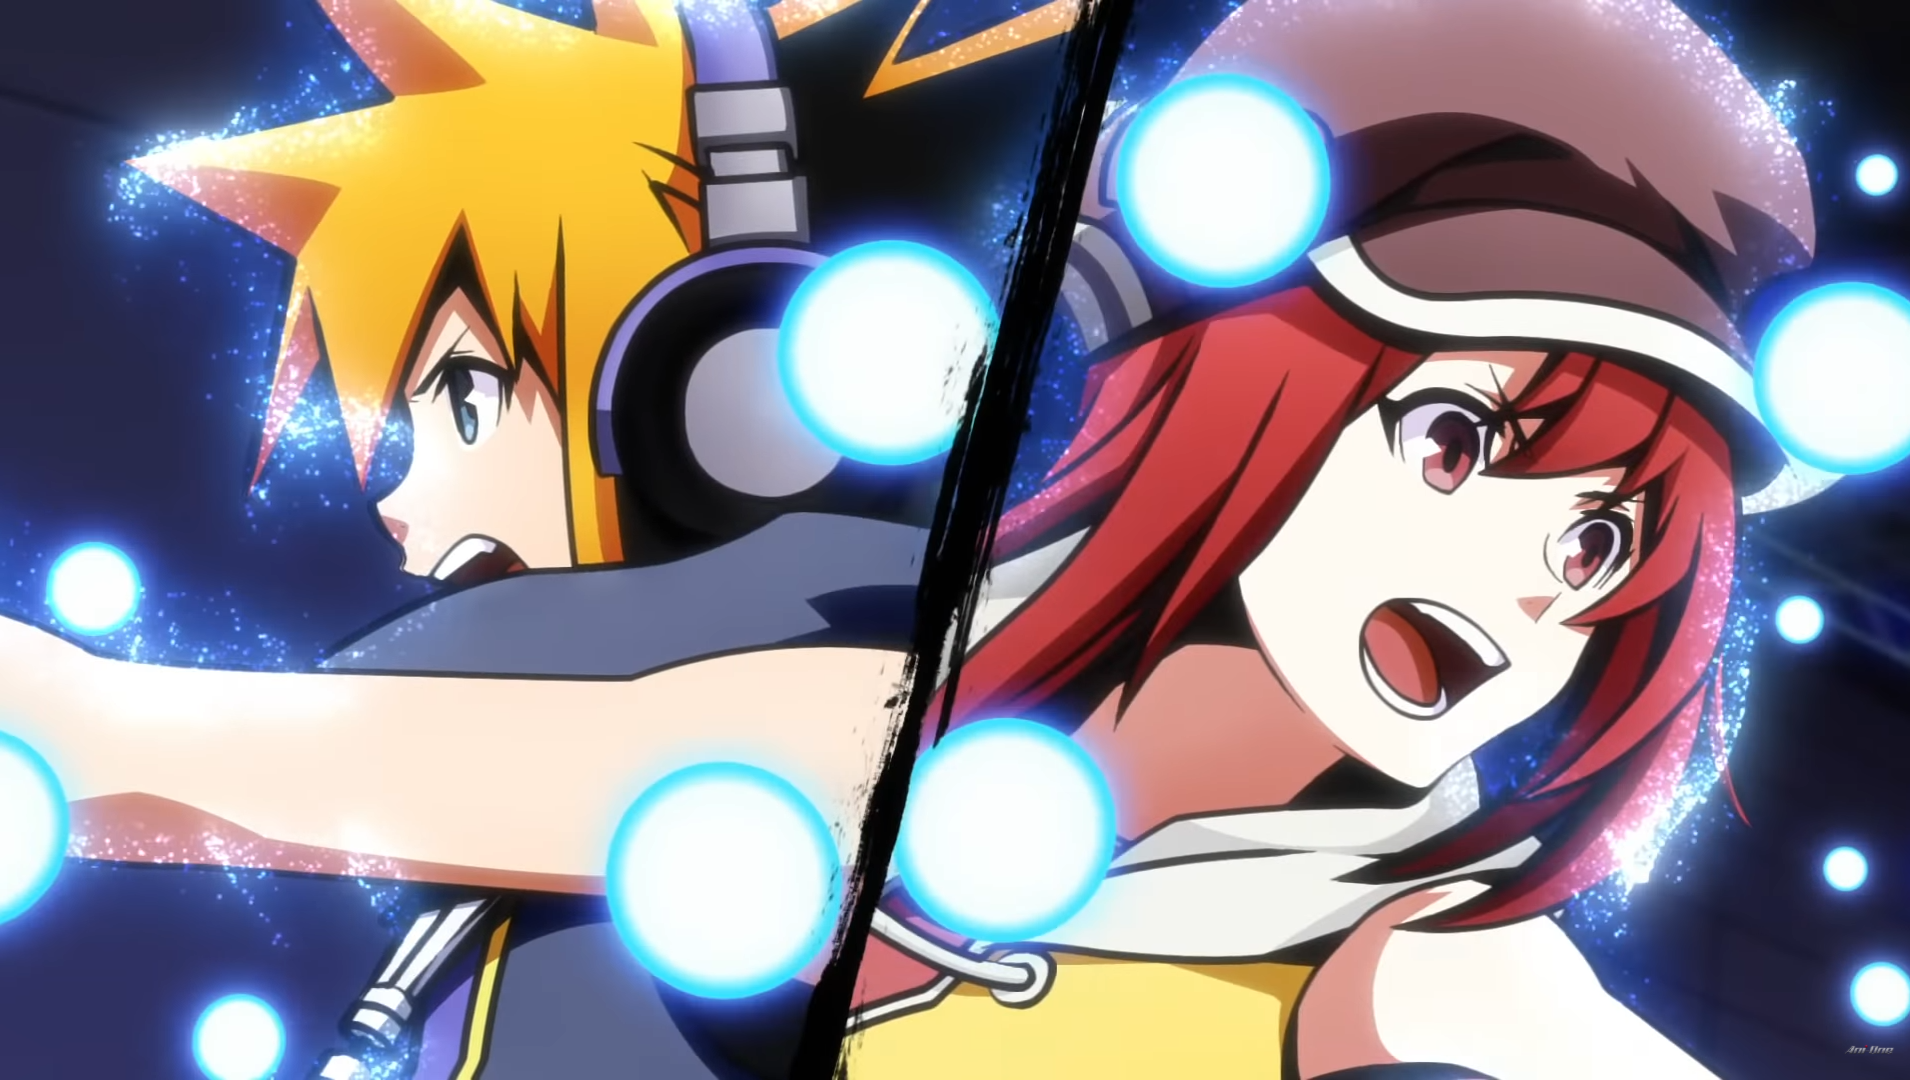 Square Enix's The World Ends With You anime adaptation out in